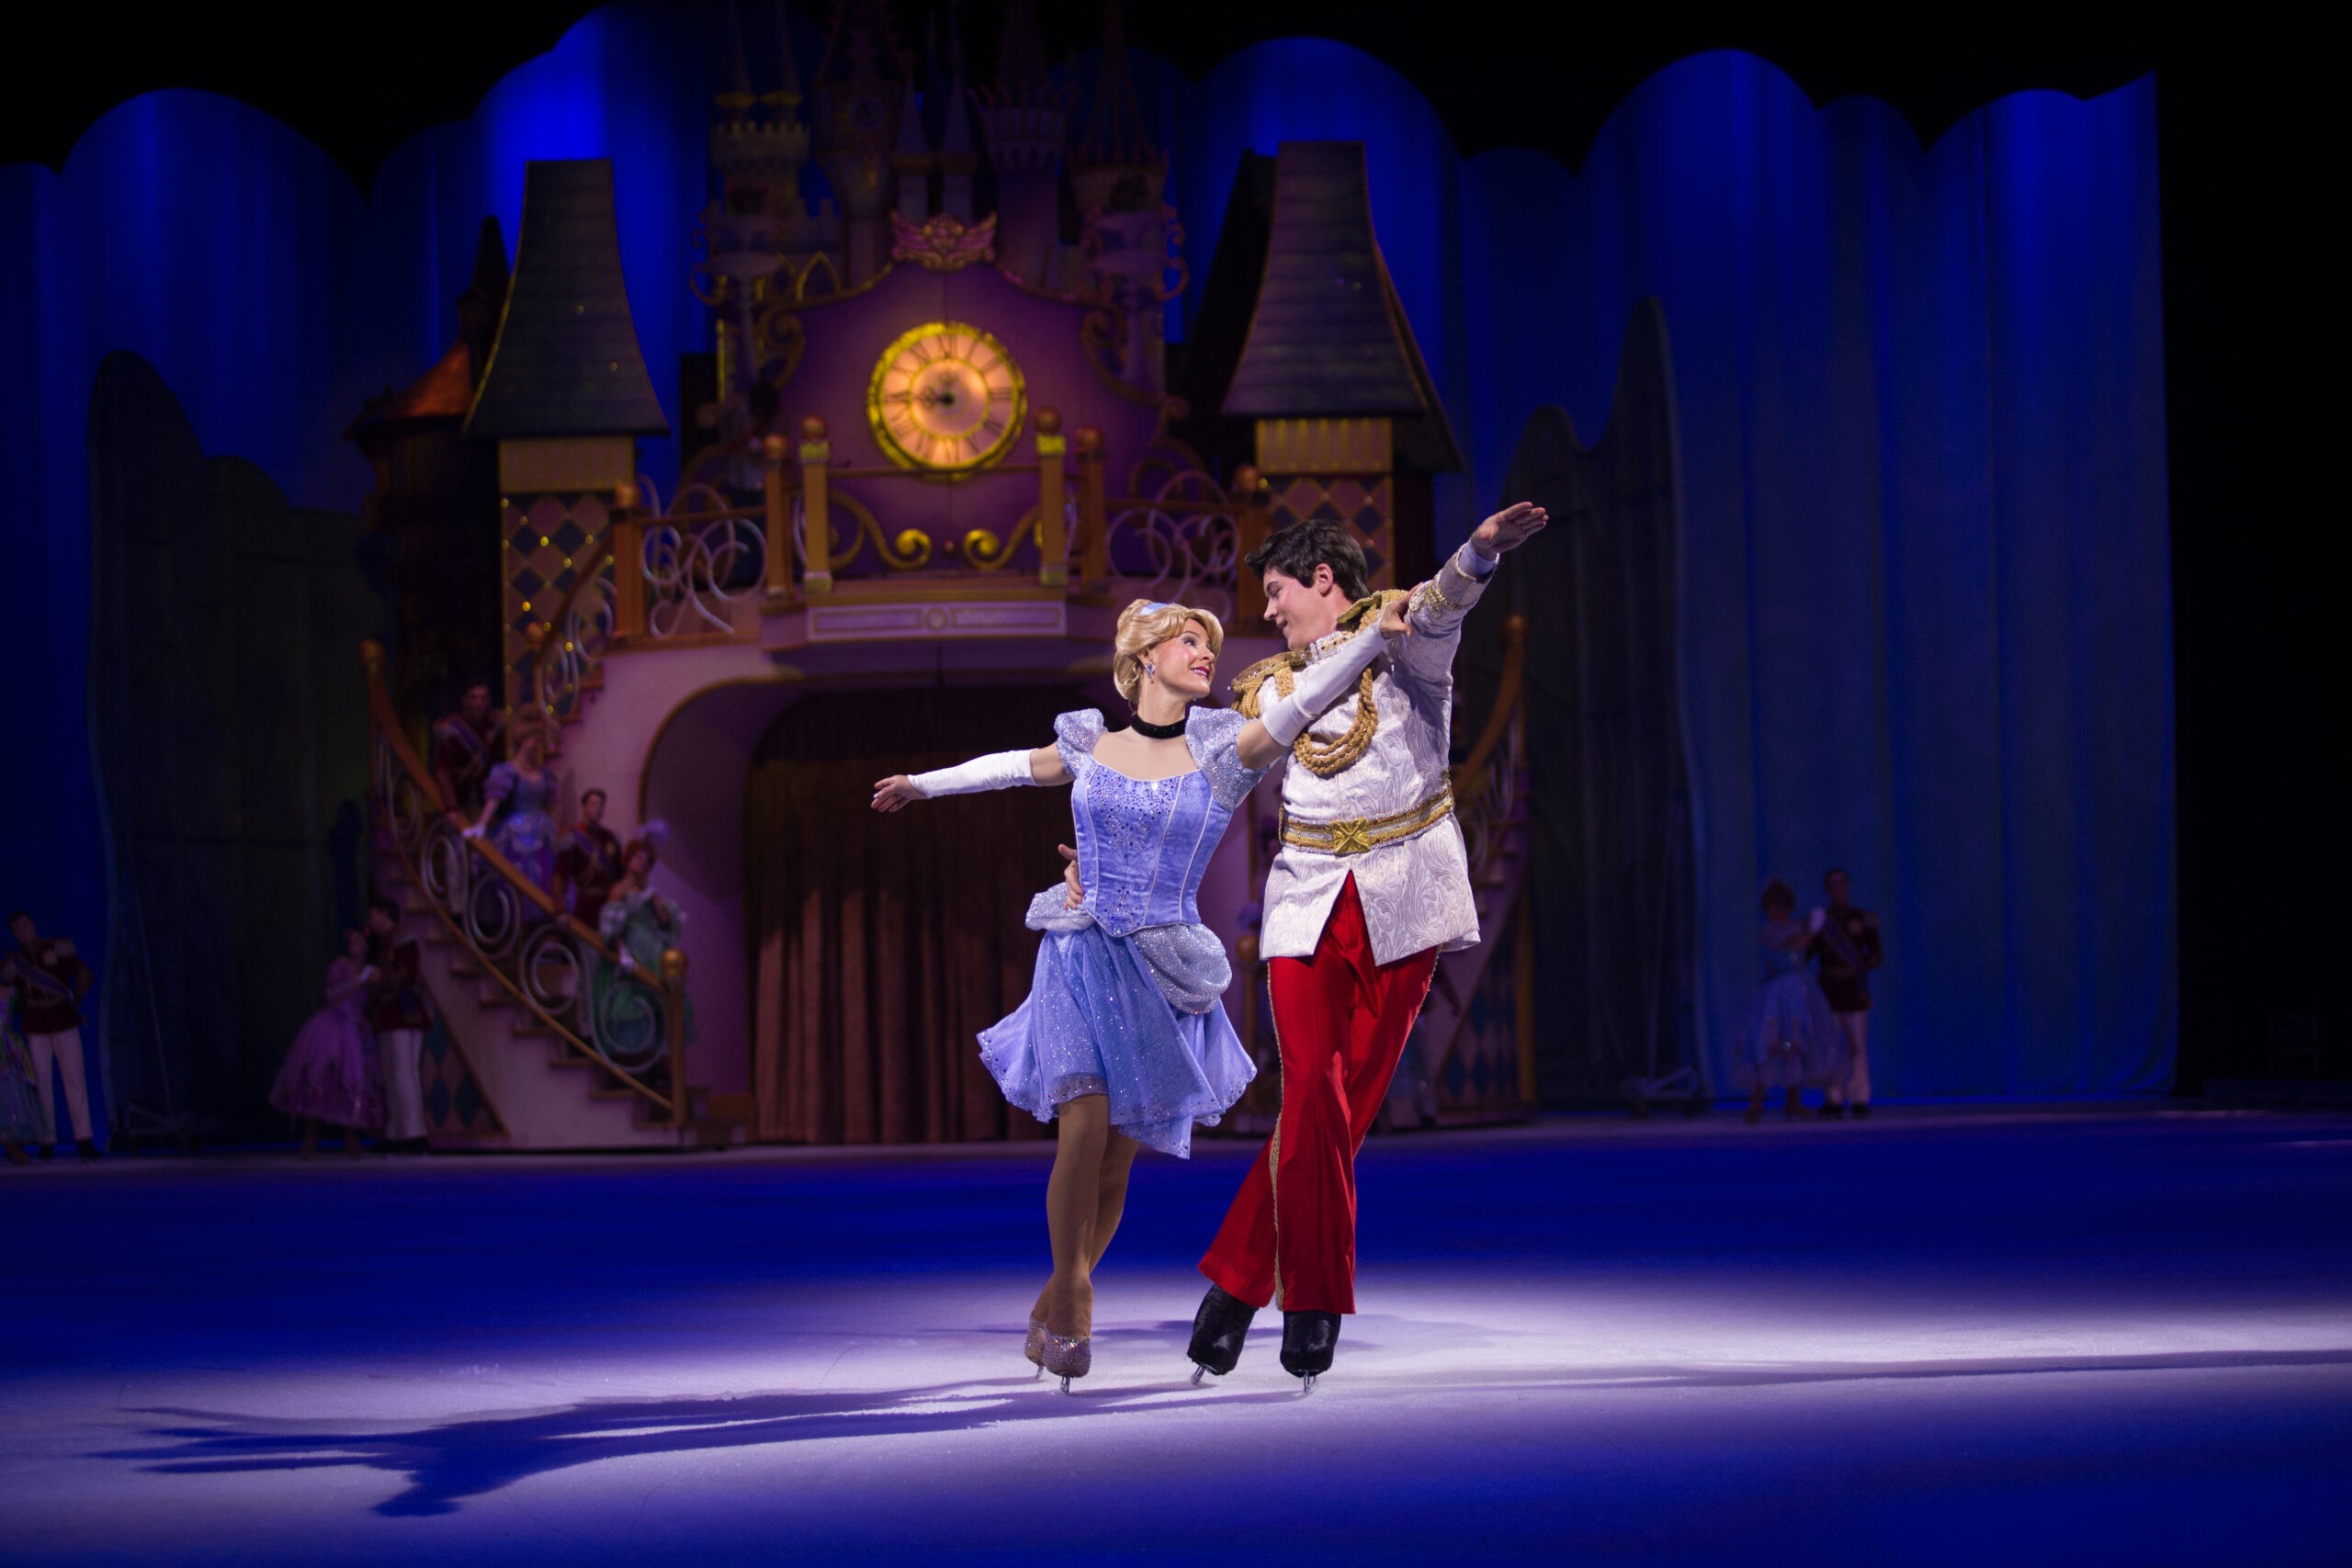 Disney on Ice In The Magic Prince Charming